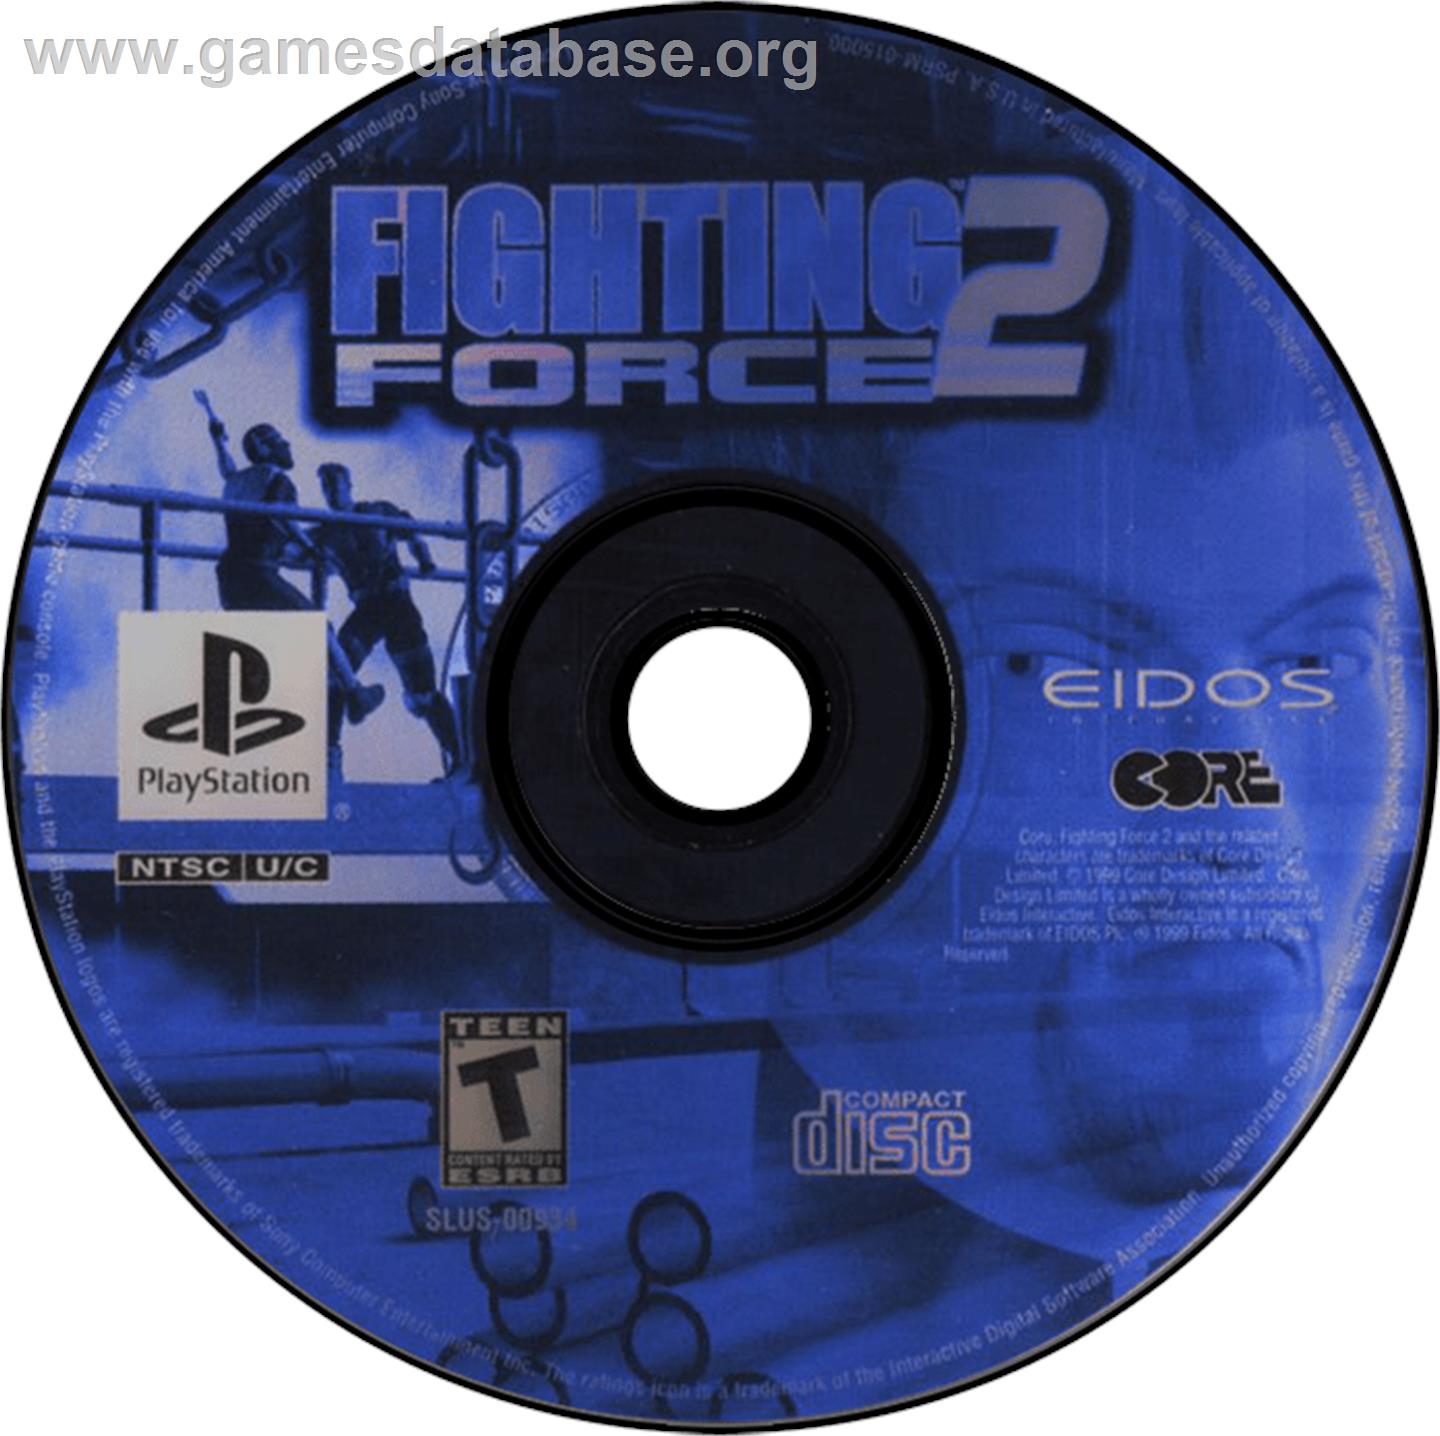 Fighting Force 2 - Sony Playstation - Artwork - Disc